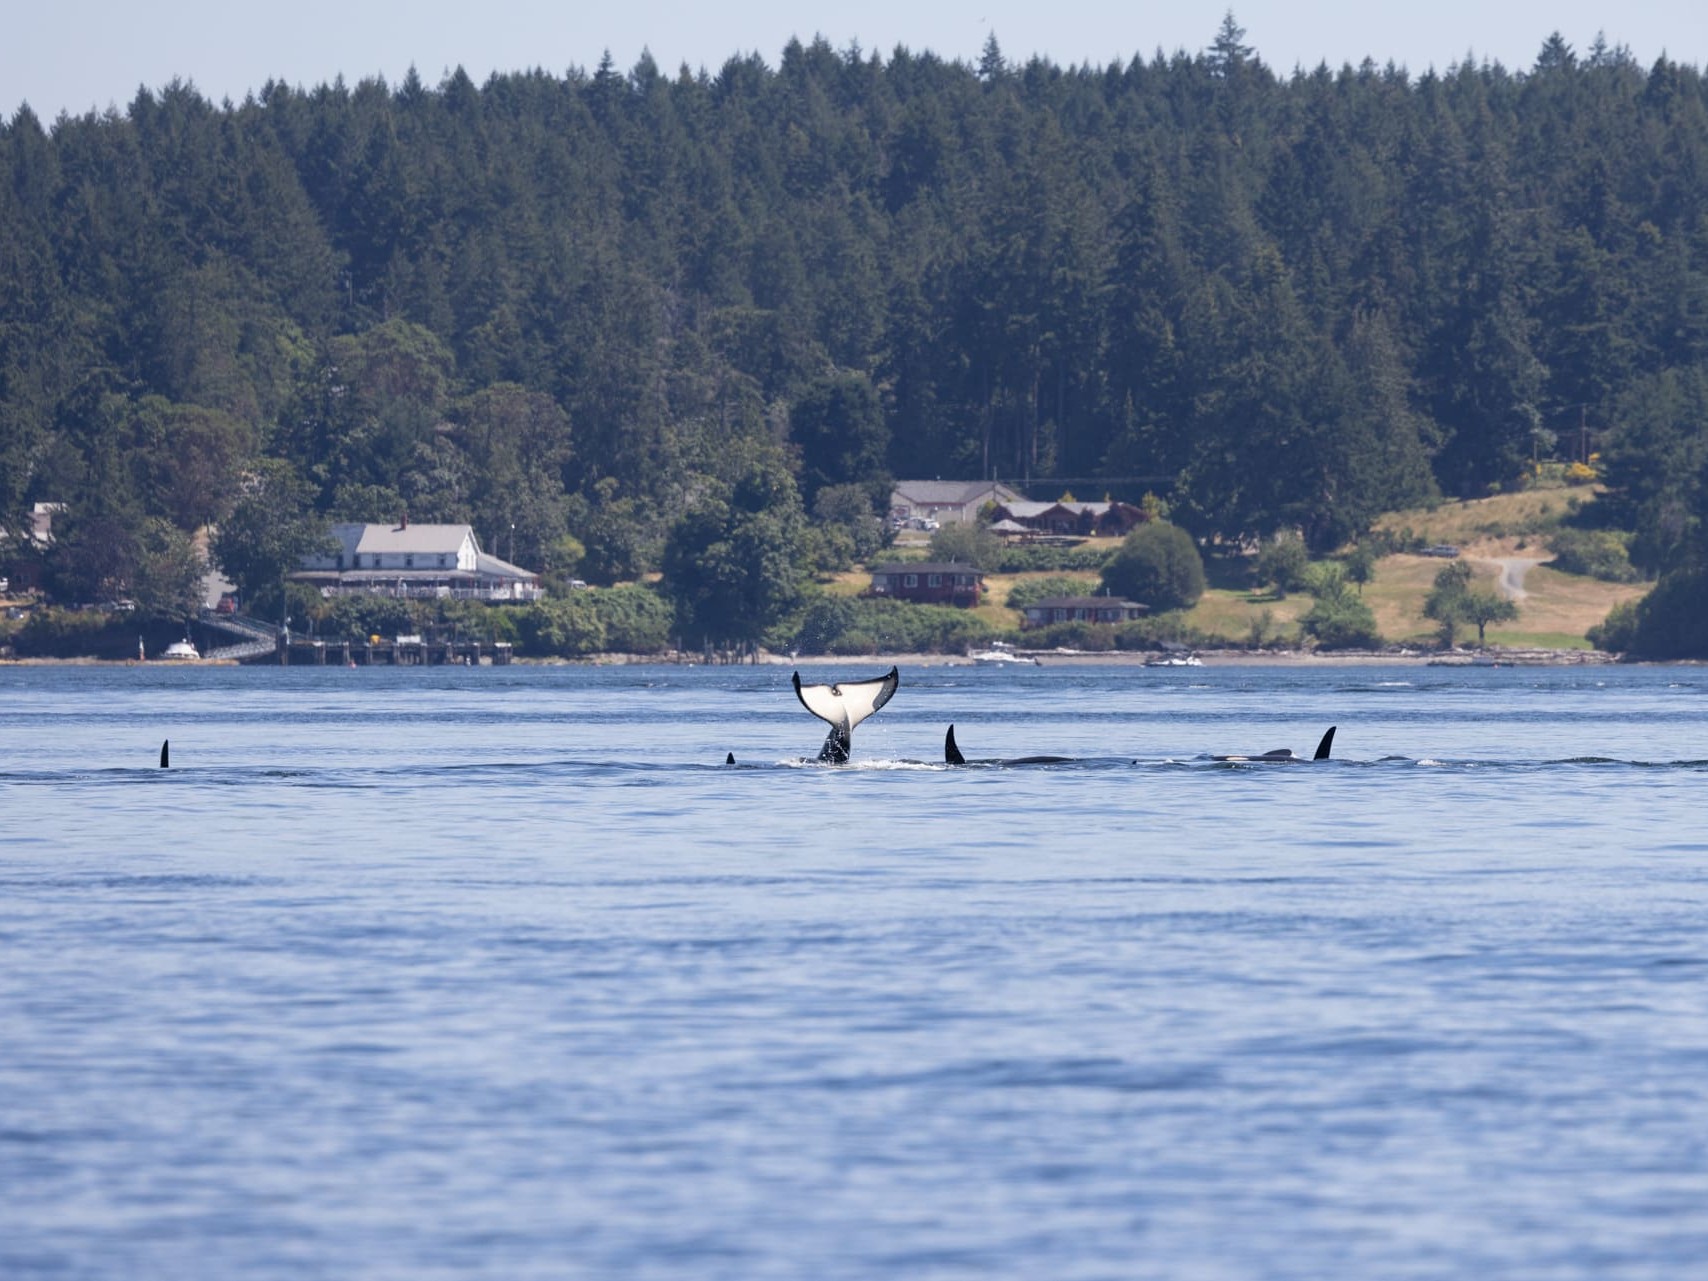 A group of Southern Resident killer whales surfacing and tail-lobbing.